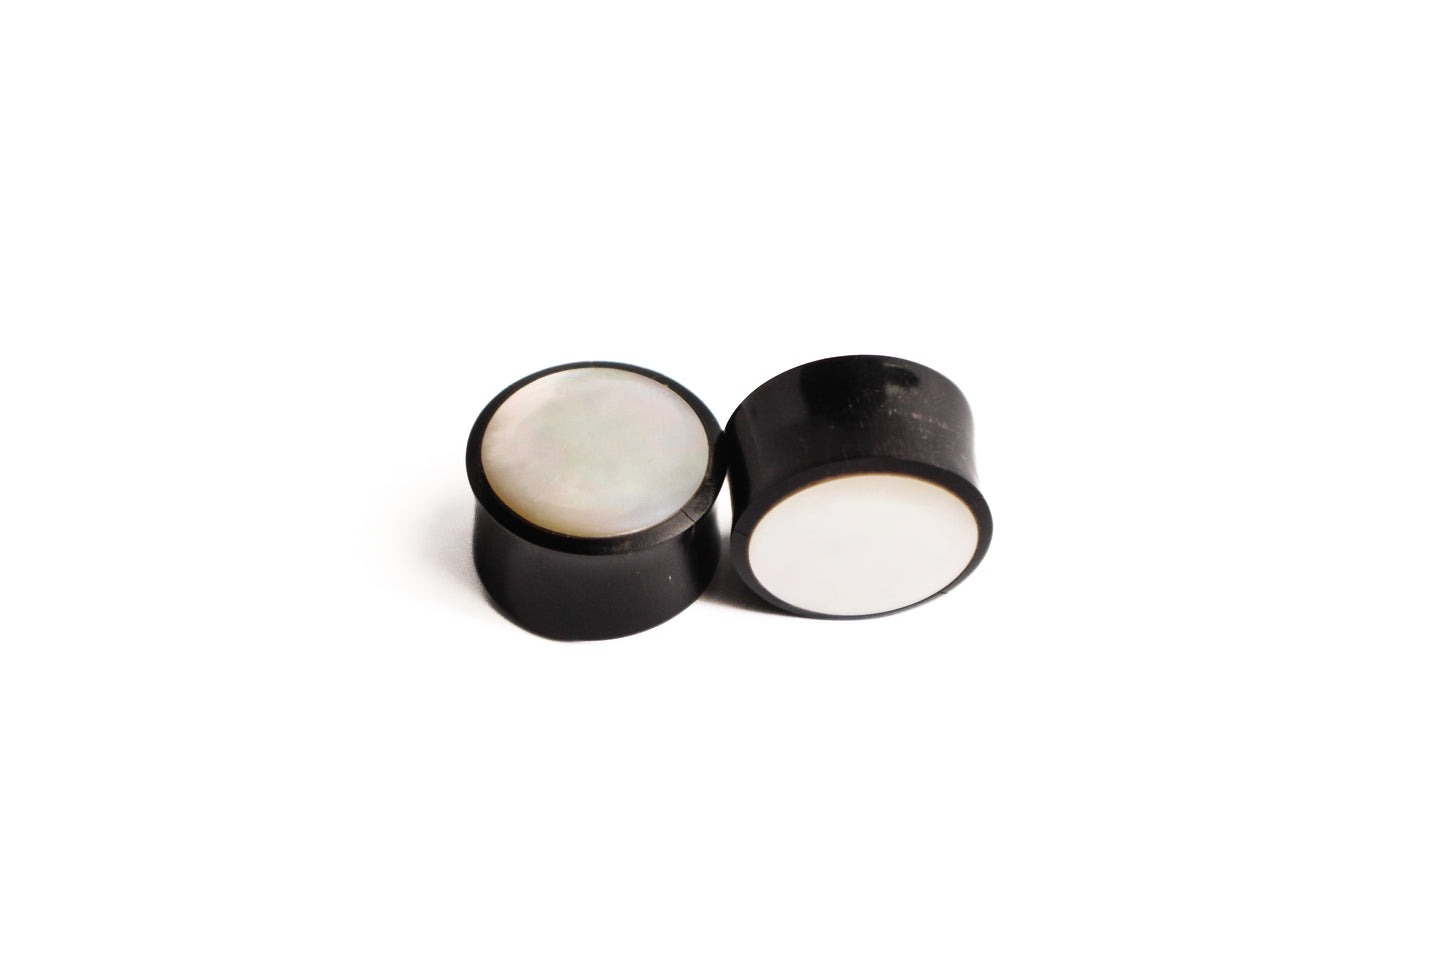 3/4" (19mm) - Horn & Mother of pearl inlay double flare Plugs